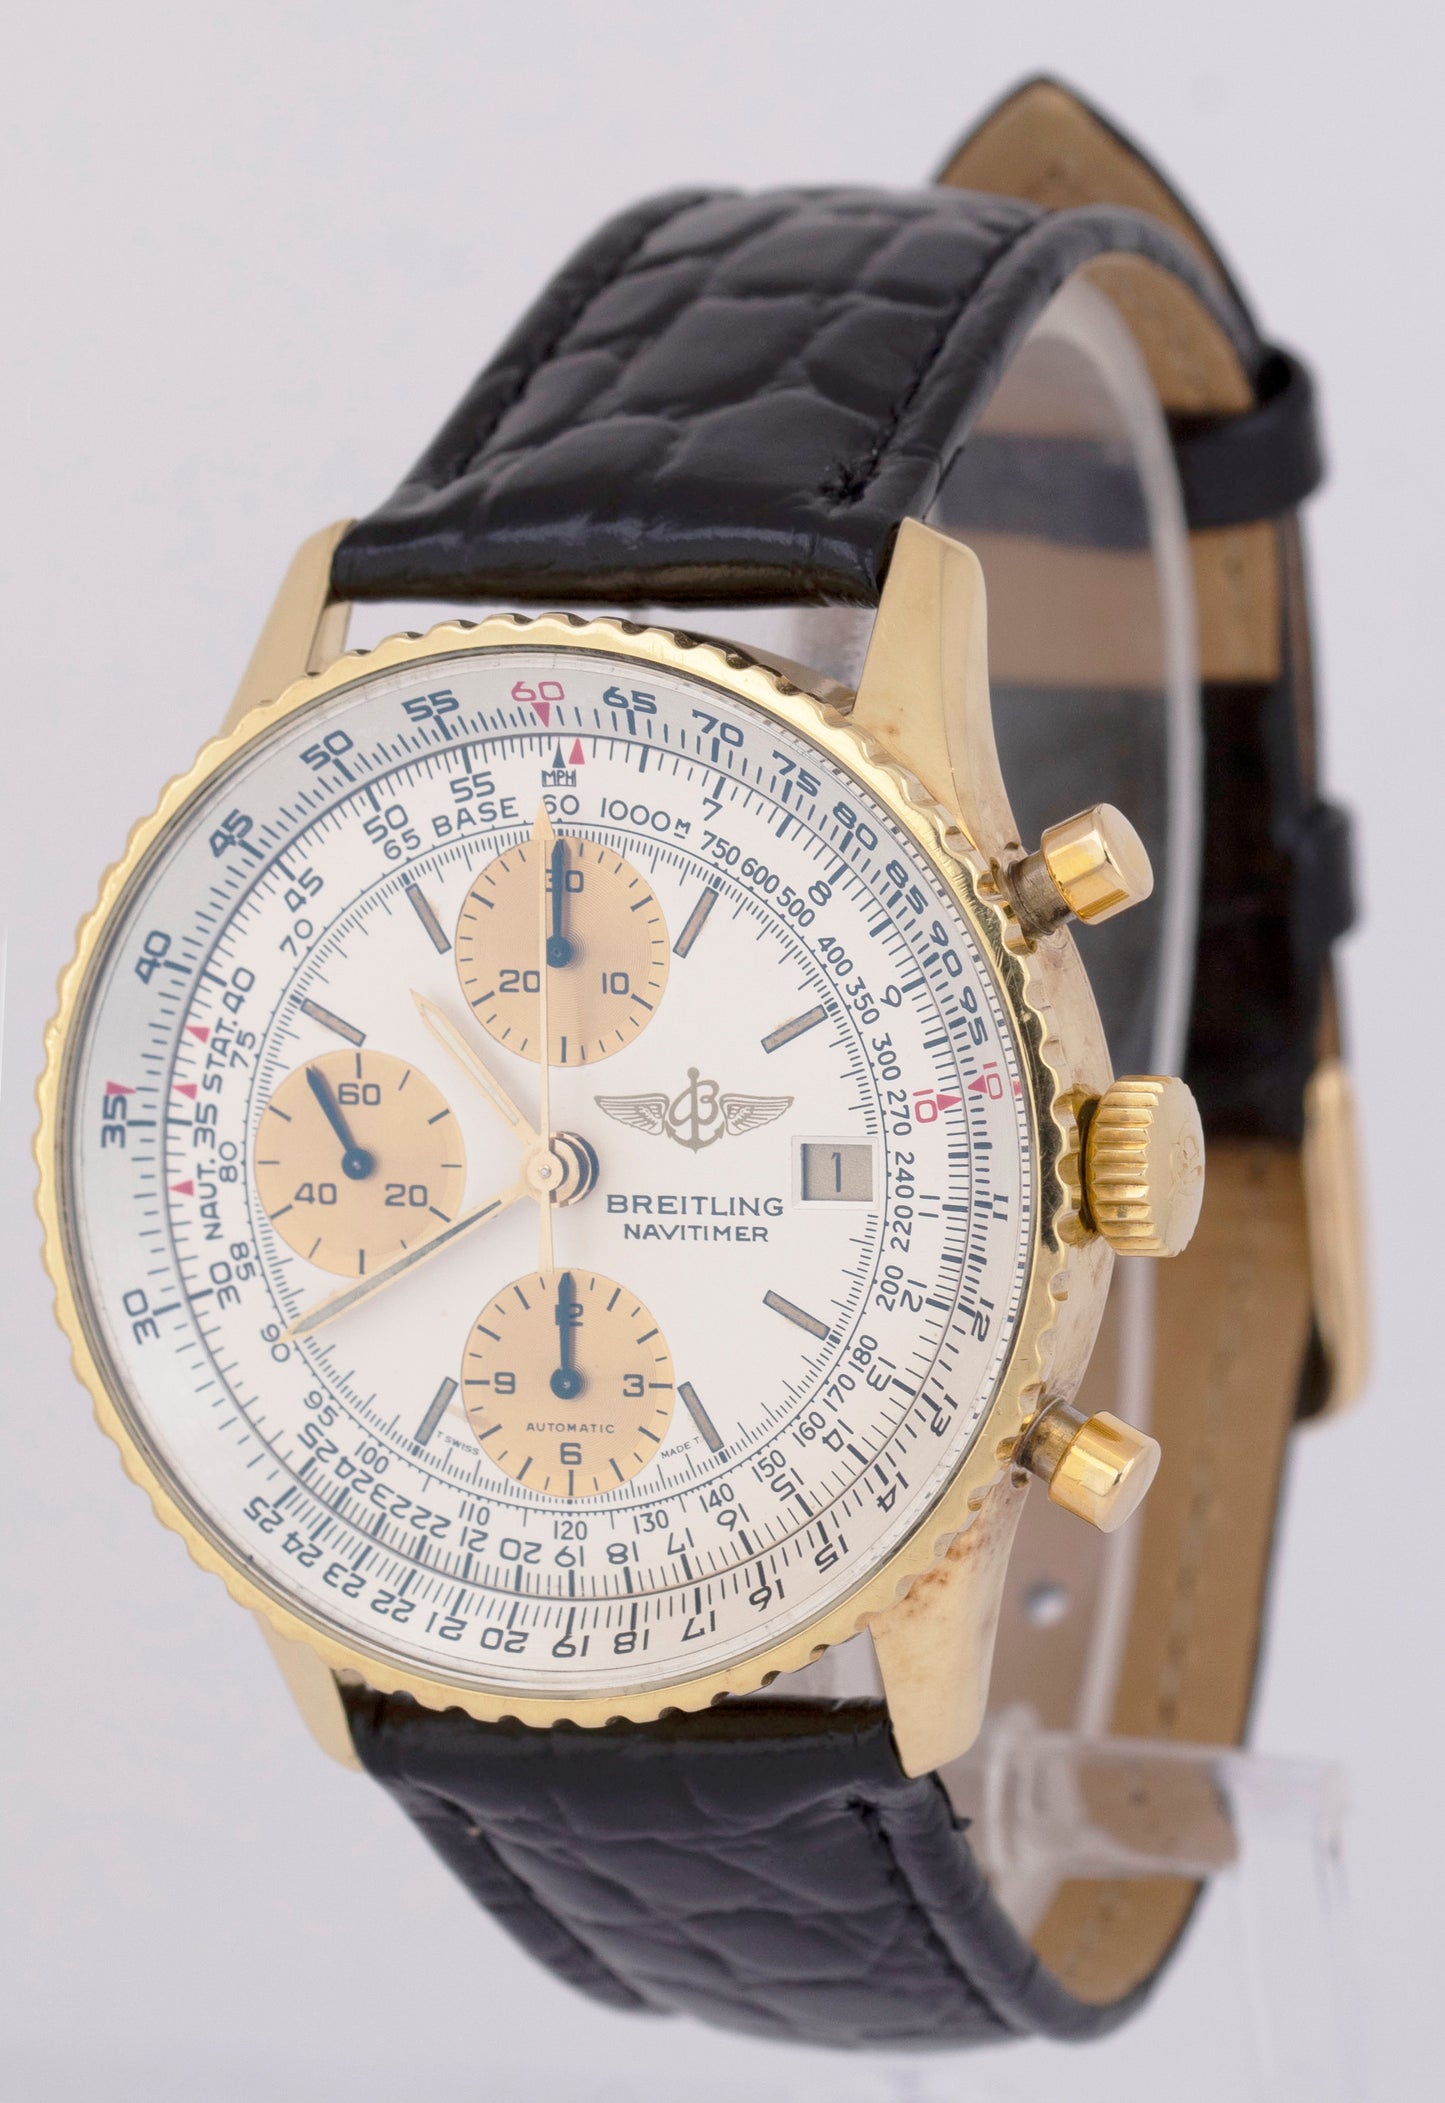 Breitling Old Navitimer Chronograph White 41.5mm Solid 18K Gold K13019 Watch